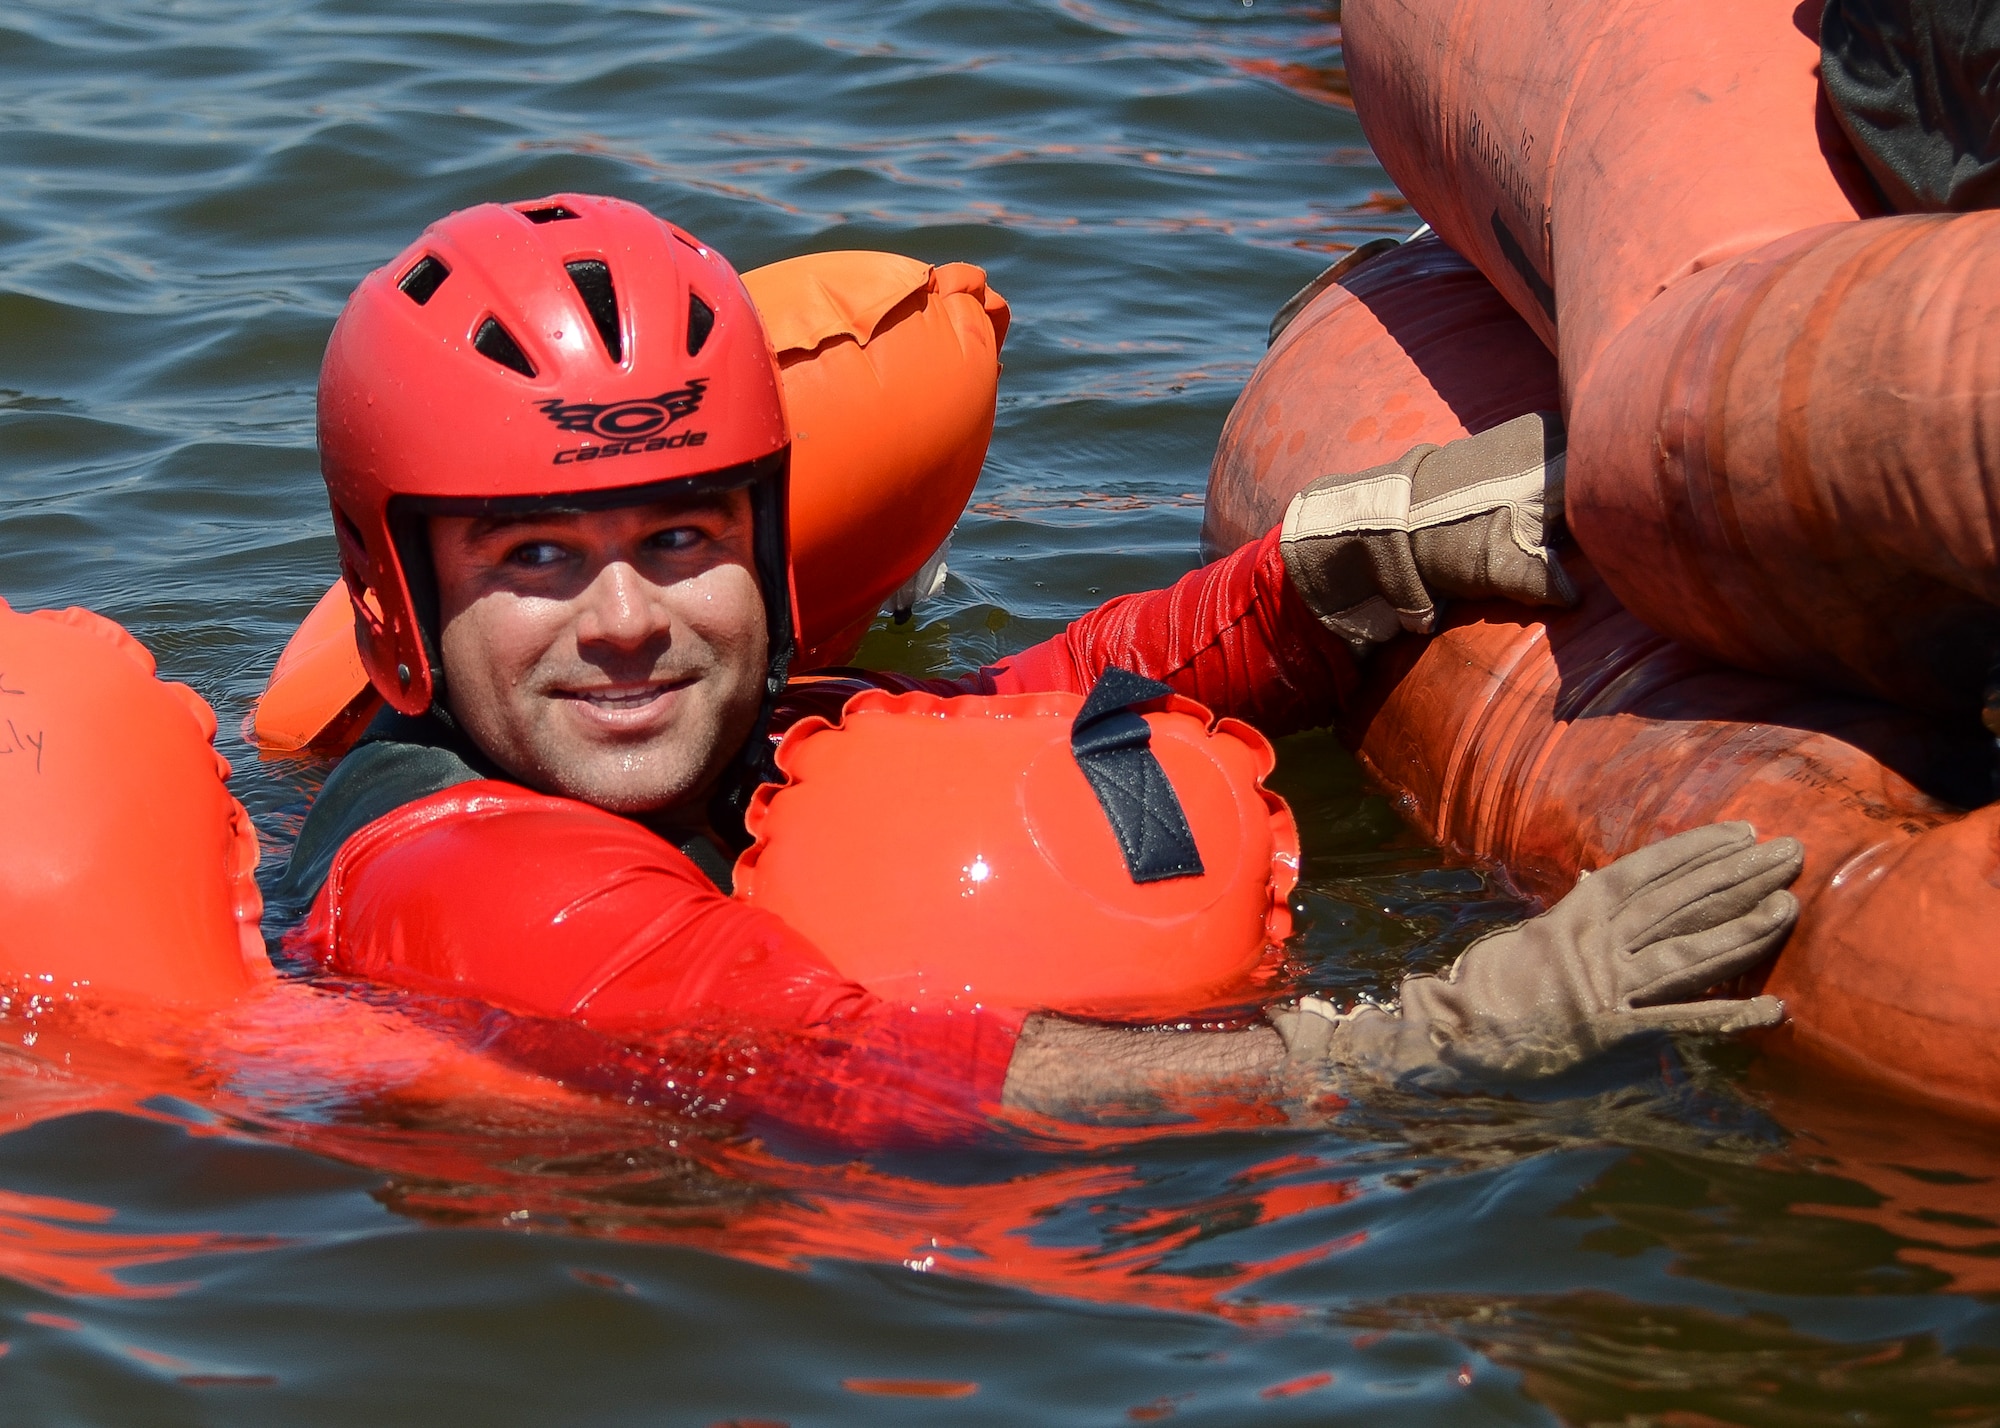 Technical Sgt. Jarrod Burgess, a 920th Operations Support Squadron Aircrew Flight Equipment, Life Support technician, demonstrates boarding a life raft Aug. 4, 2018 at Patrick Air Force Base, Florida.